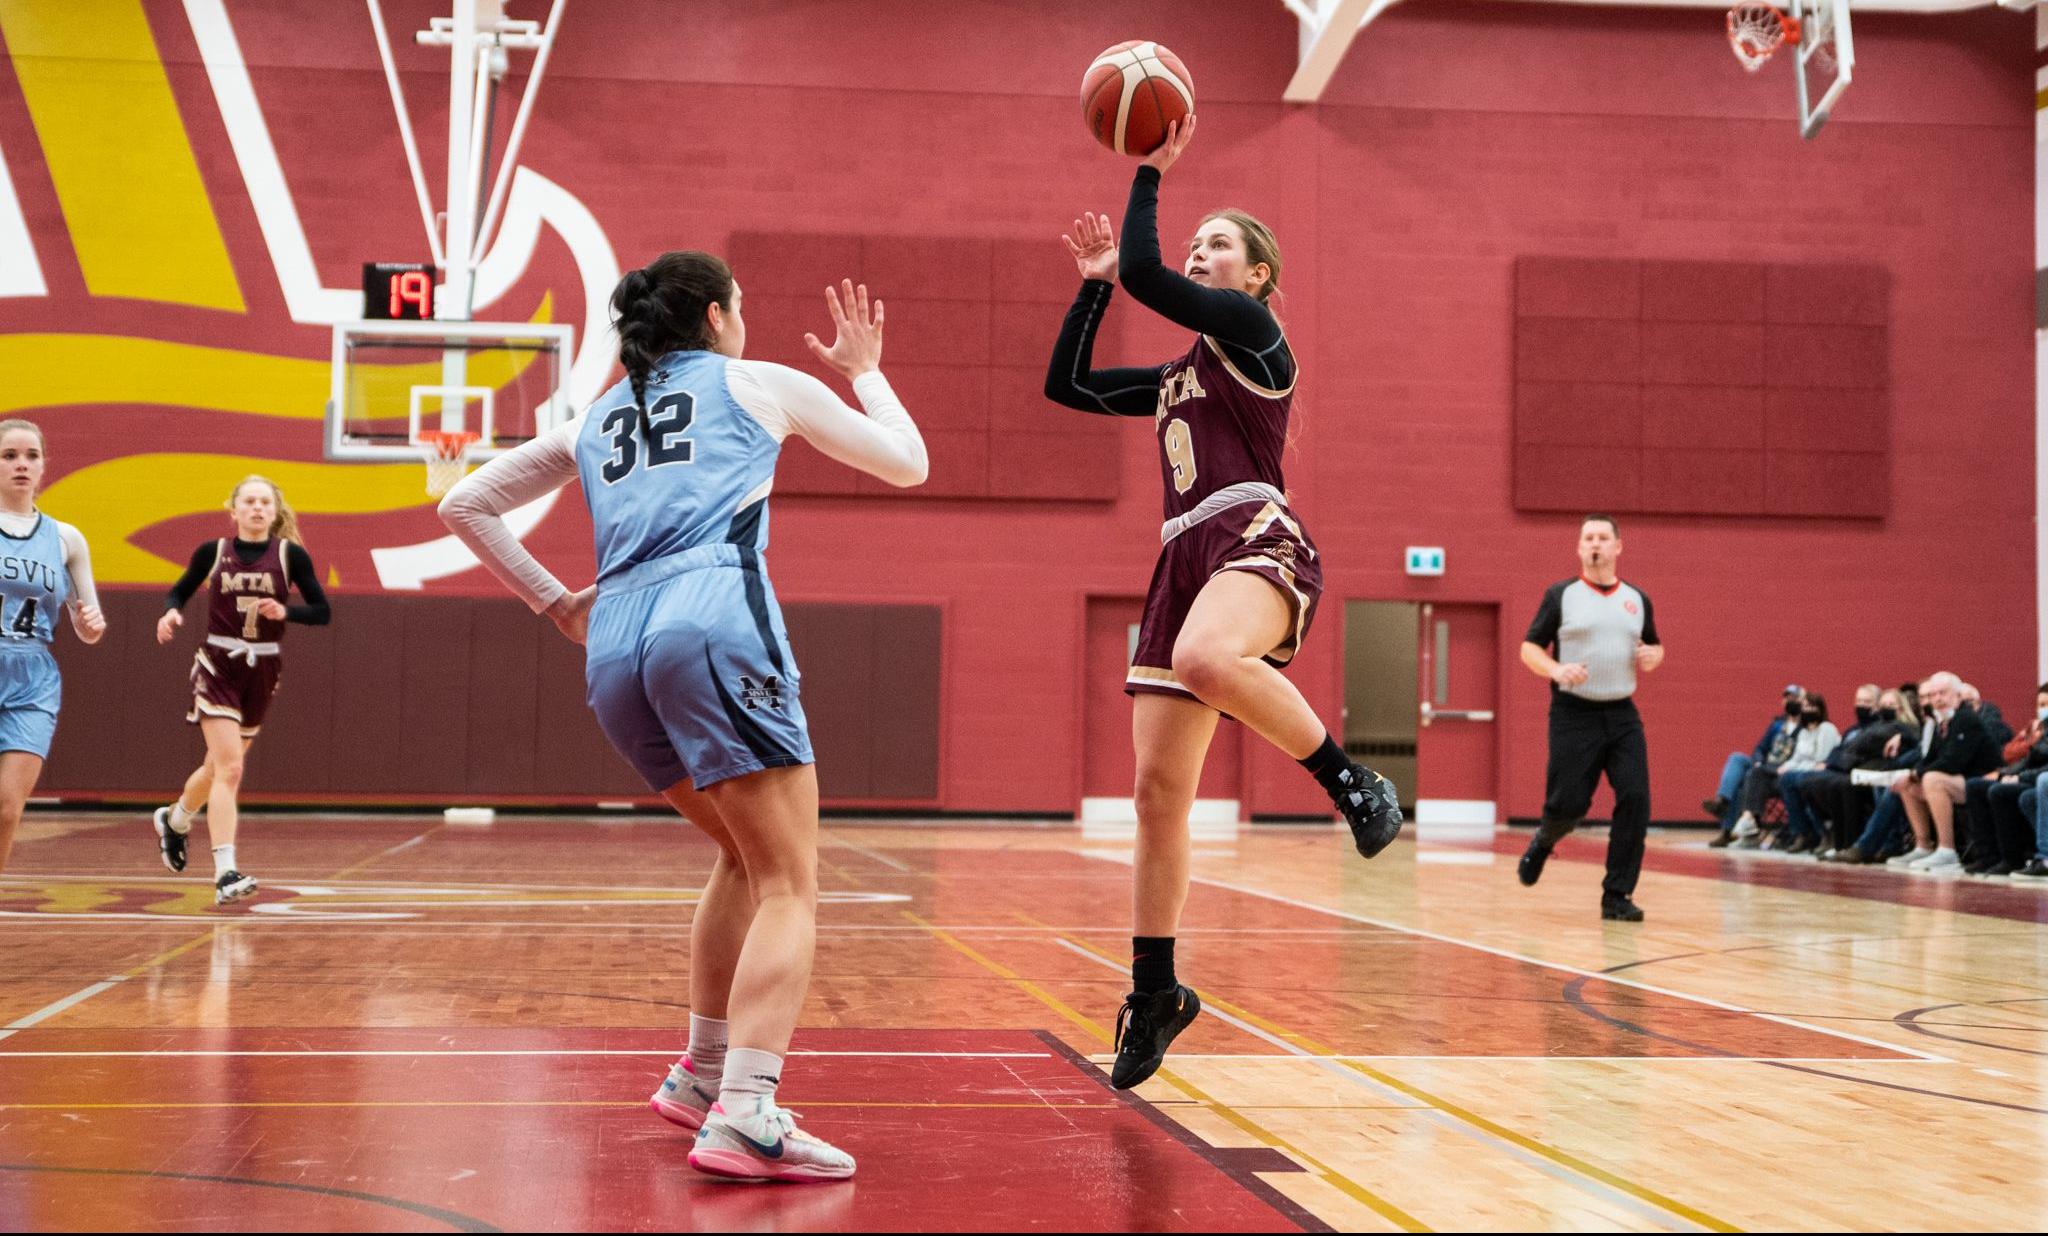 Mounties beat 2nd ranked team in the nation Mystics